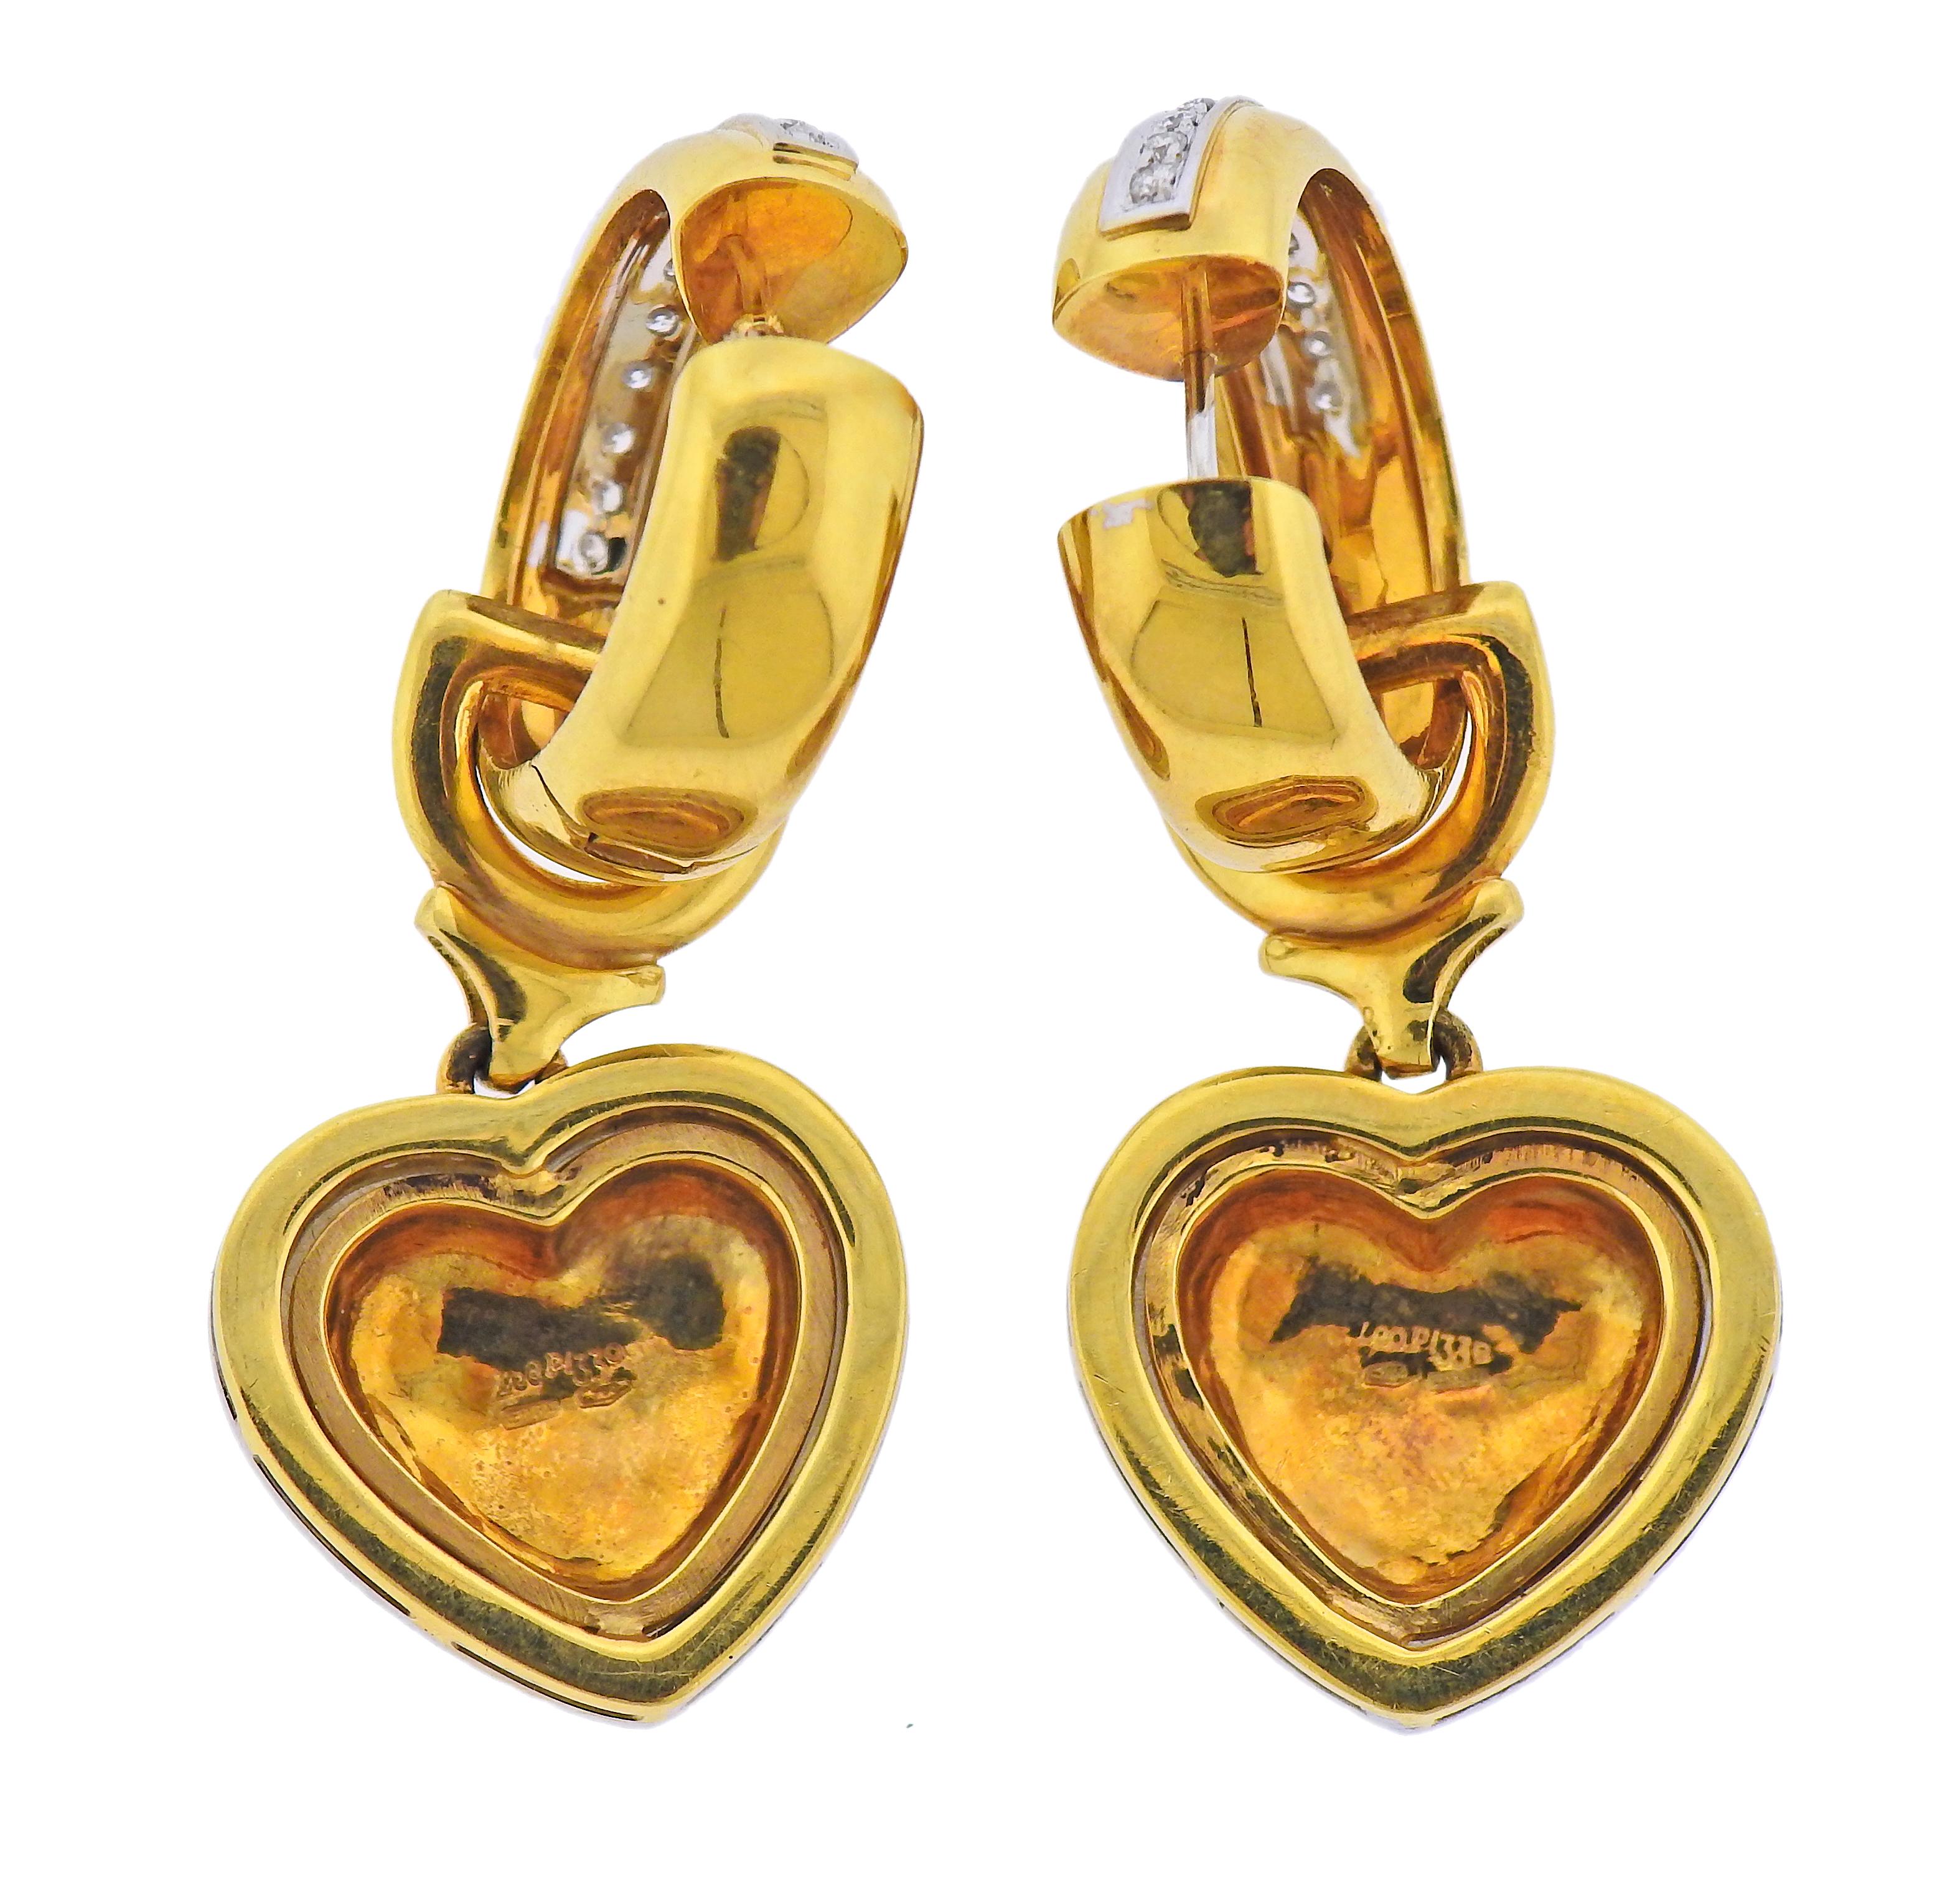 Pair of Loo Pizzo 18k gold hoop earrings with heart drop pendants. Adorned with approx. 1.40ctw in diamonds, hoops are 23mm in diameter x 7.3mm wide. heart drops are 30mm x 22mm. Hearts are removable. Marked: 750, Leo Pizzo, Italian mark.  Weight -